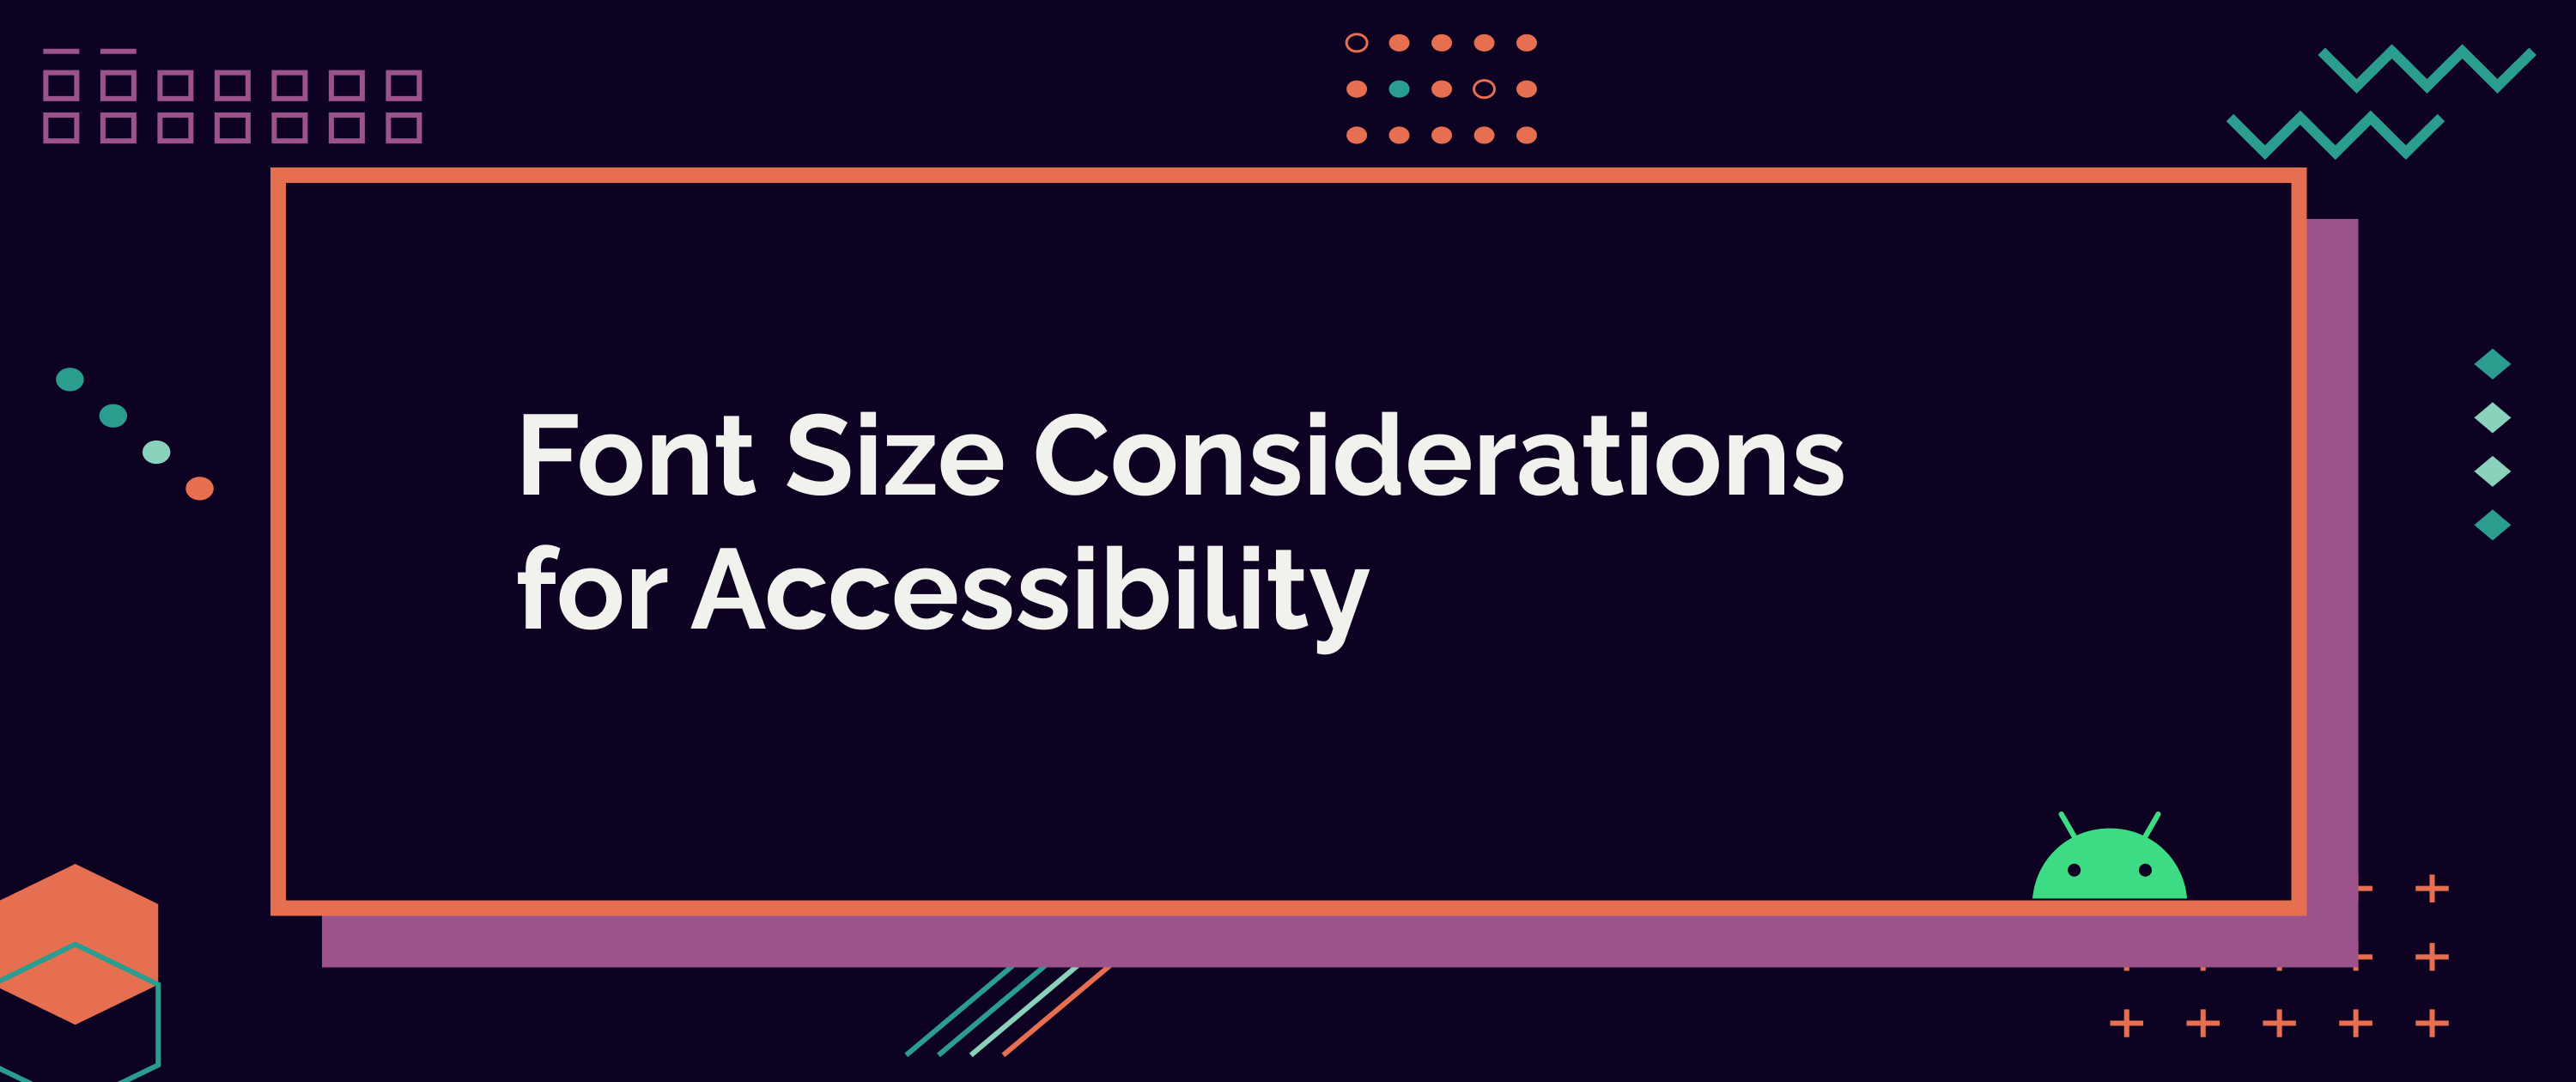 Font Size Considerations for Accessibility